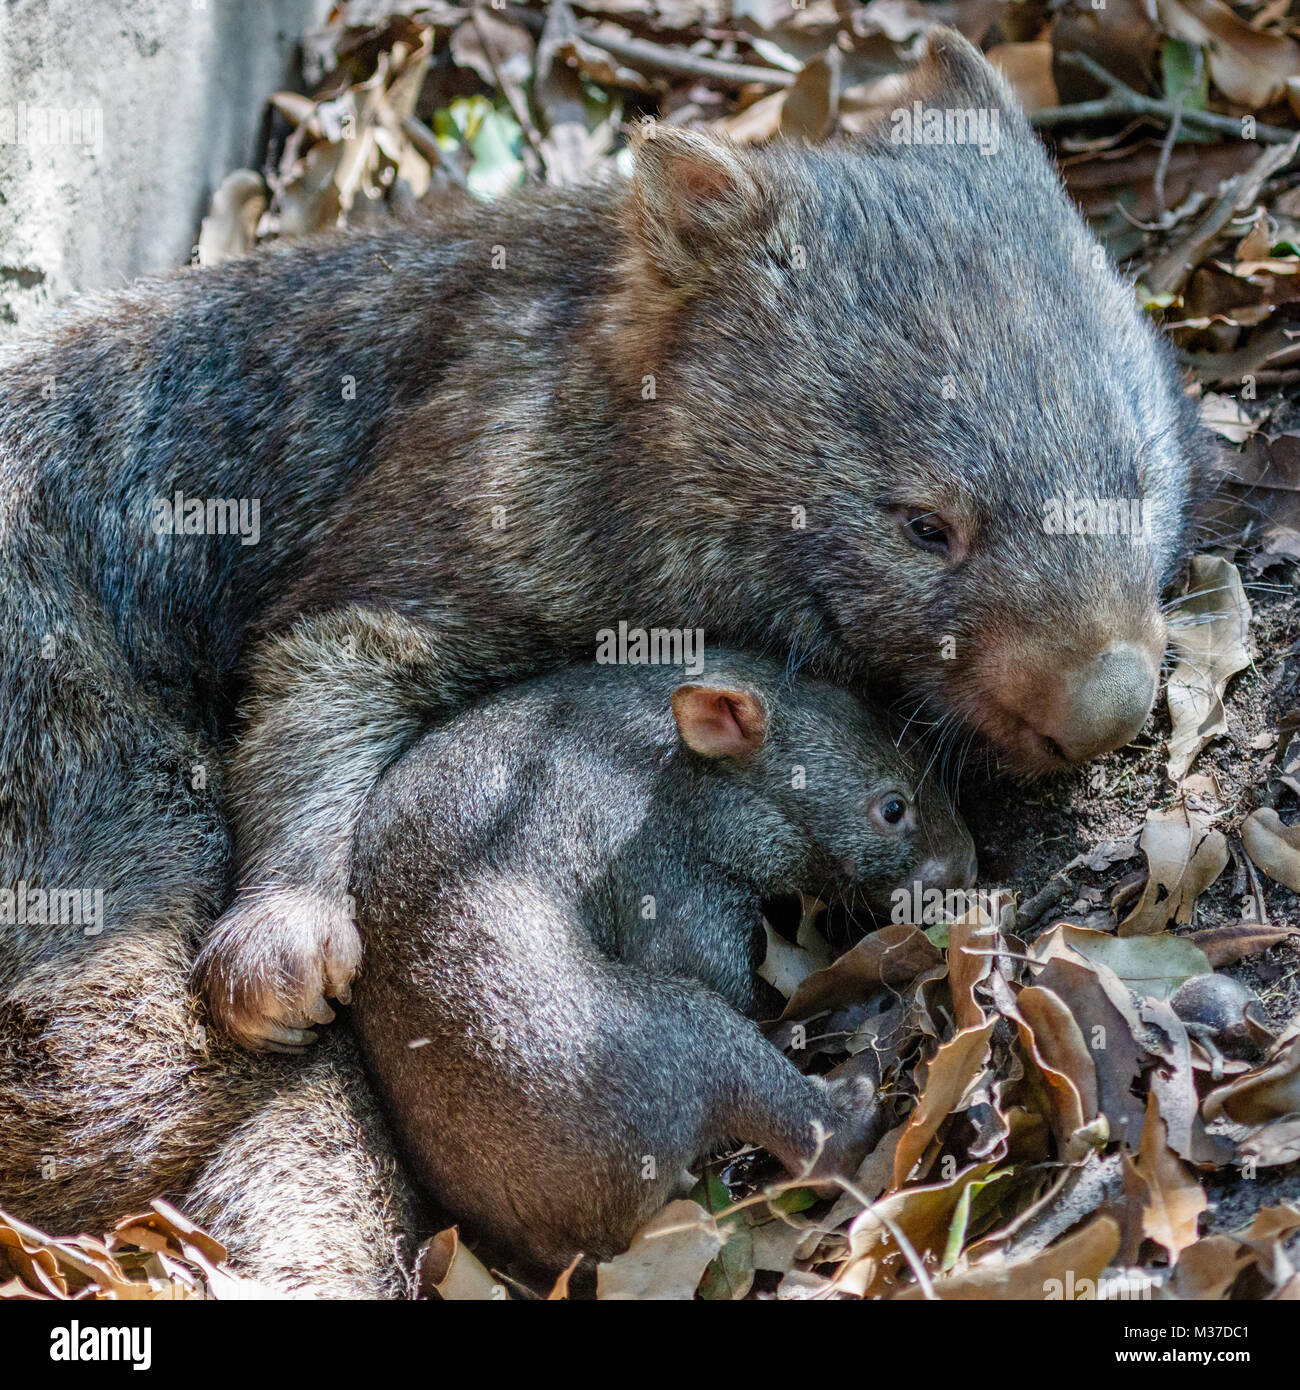 Female wombat with her baby joey, Queensland, Australia. Square image Stock Photo